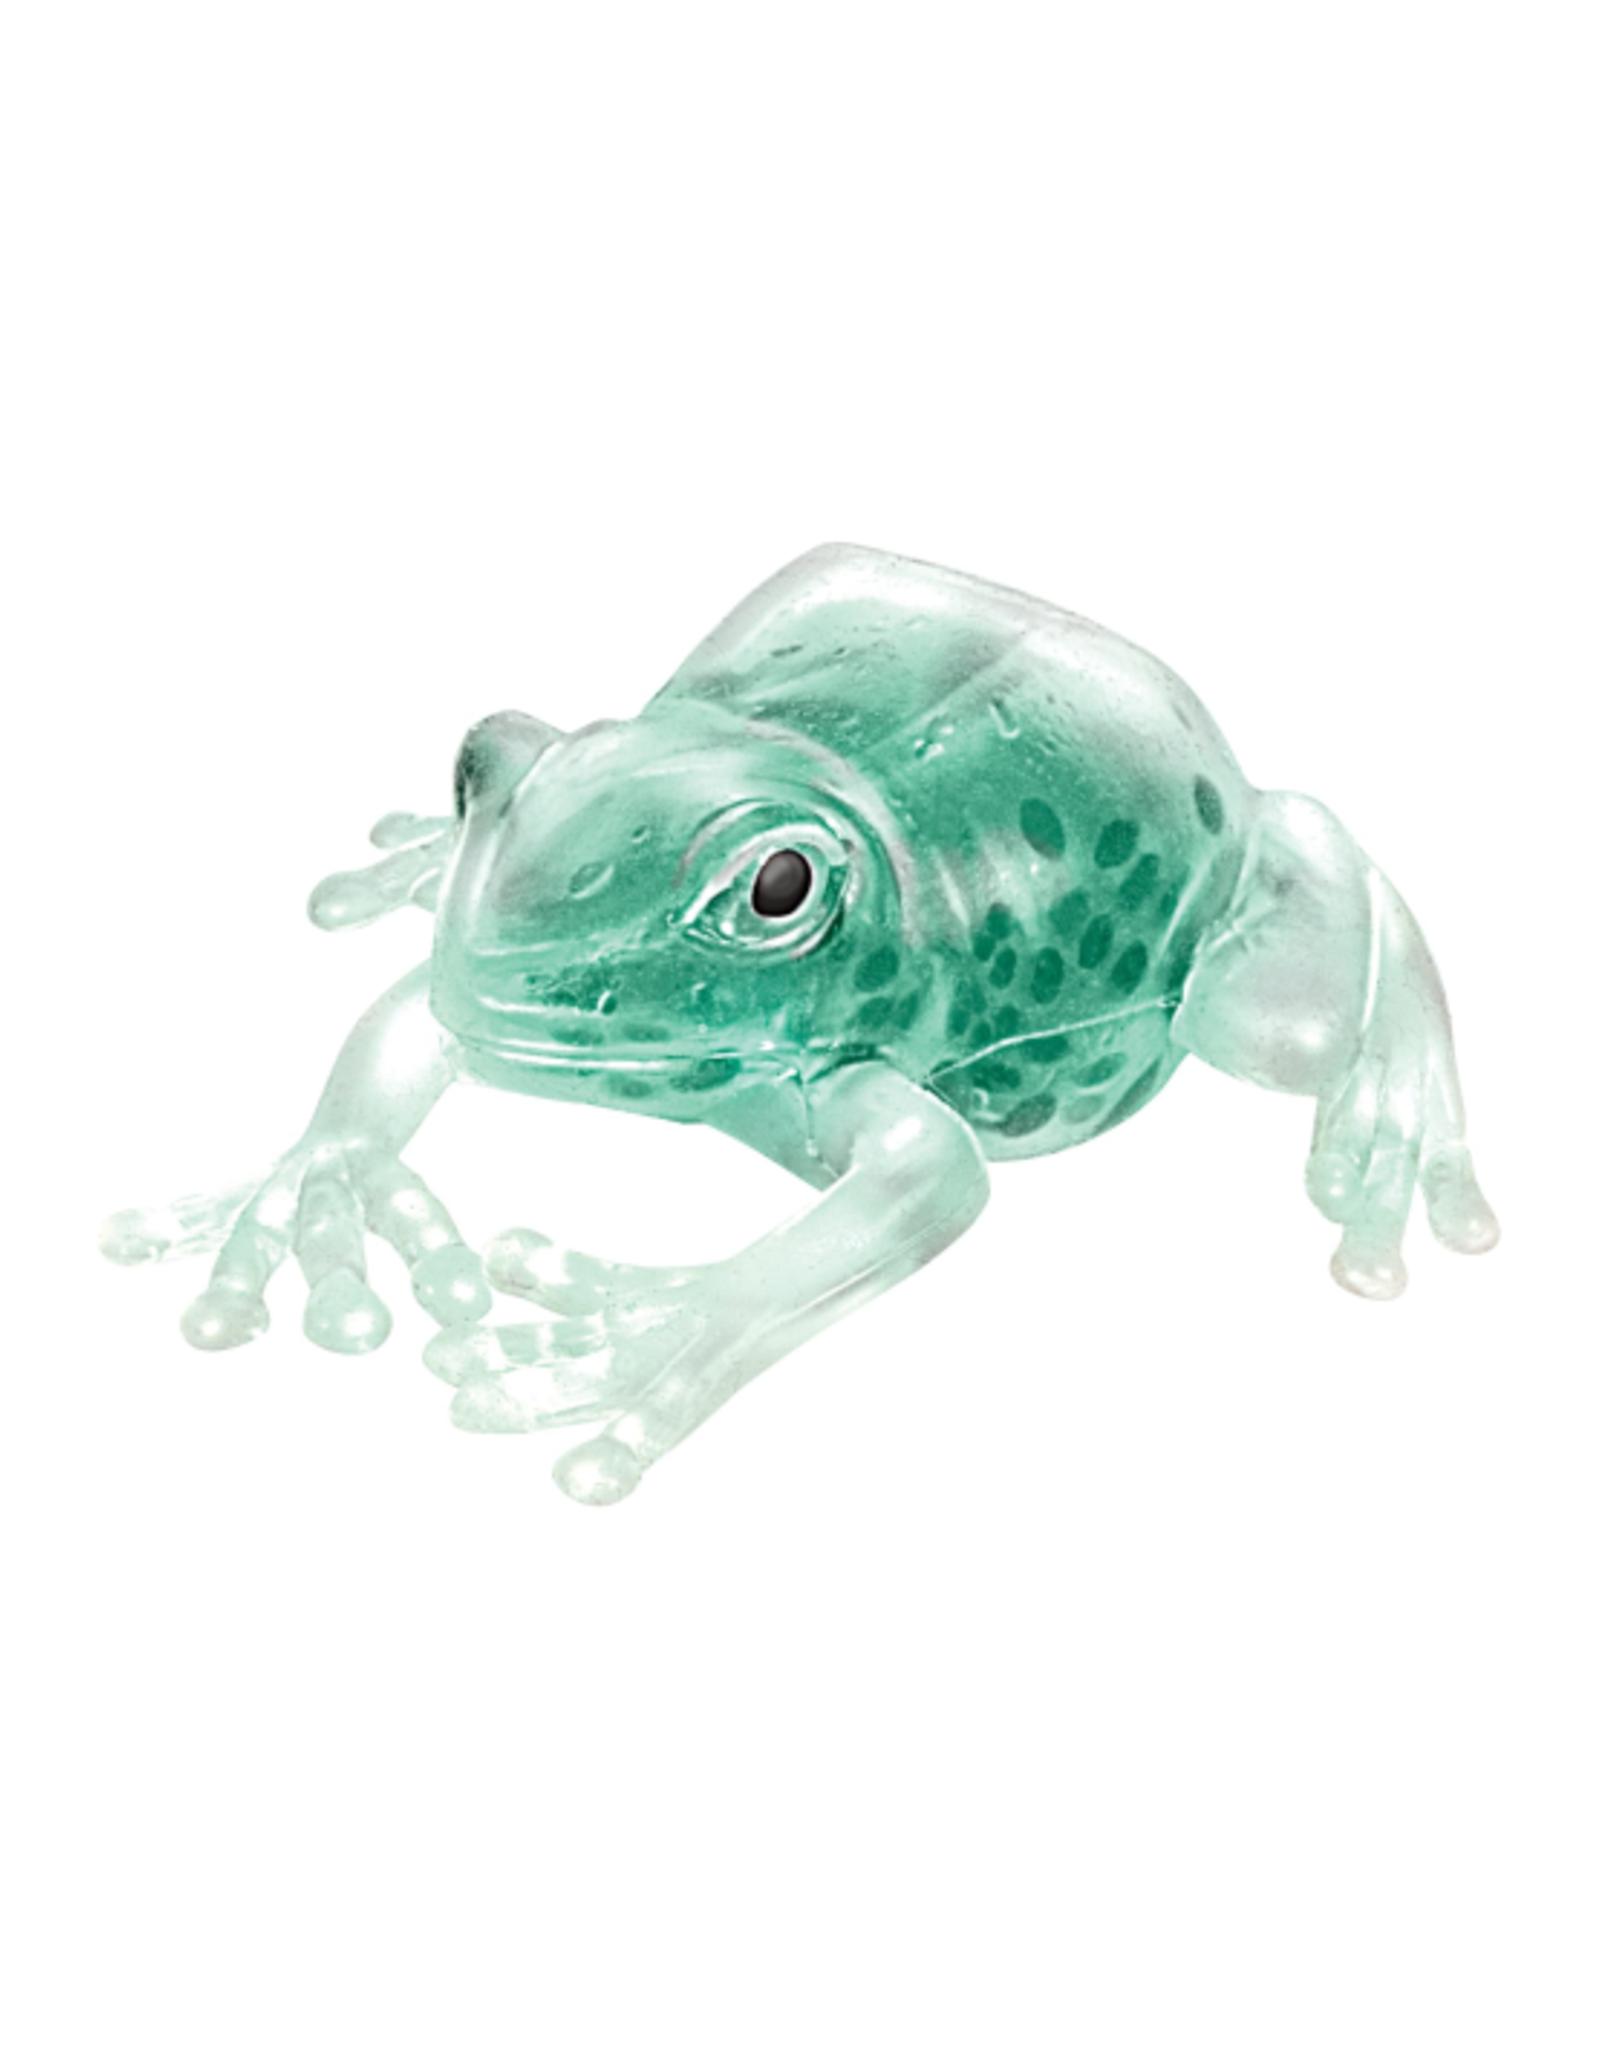 Schylling - Squish the Frog -  - Westmans Local Toy